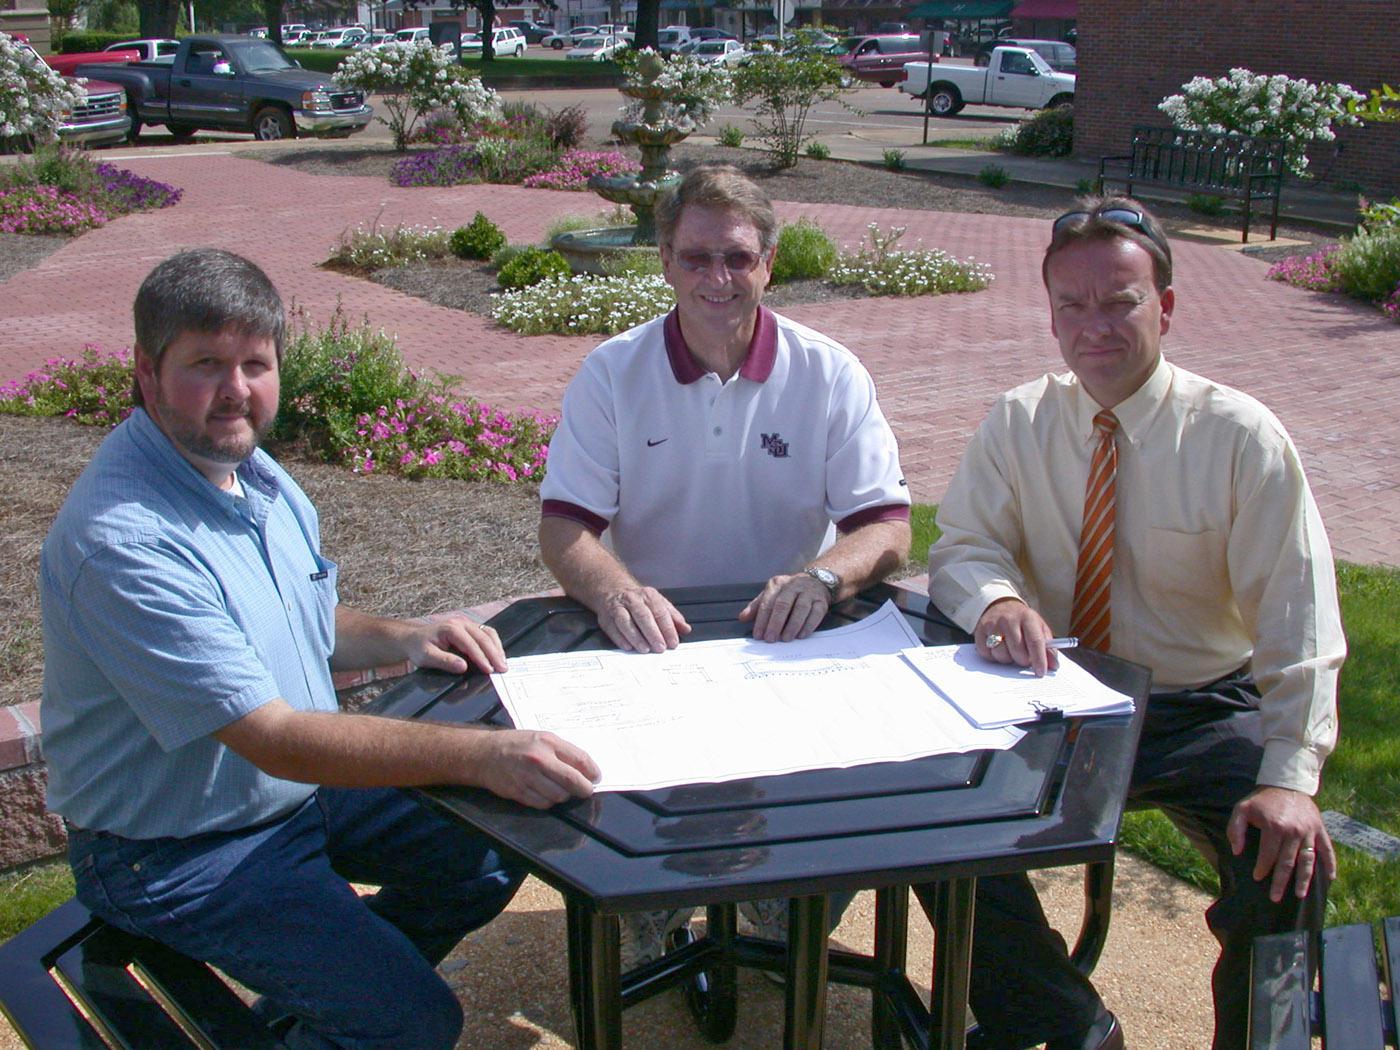 Chickasaw County Extension agent Scott Cagle, left, discusses improvements for Houston Garden Park in the town square with local Master Gardener president John Walden, center, and city mayor Stacey Parker. (Photo by Artis Ford)